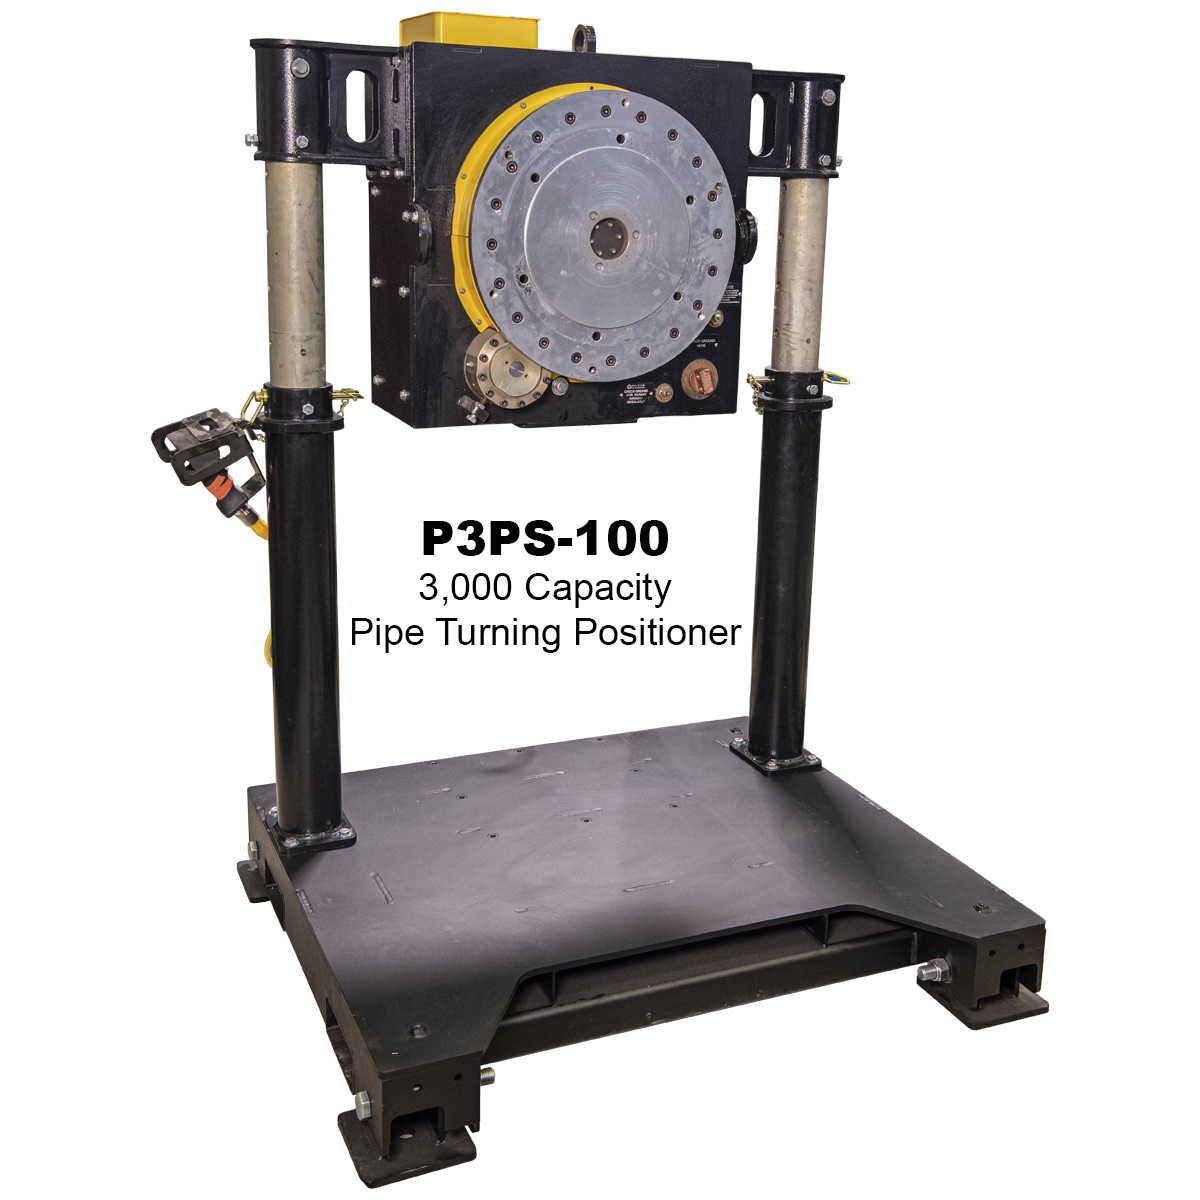 01-3000-lb-Pipe-Turning-Positioner